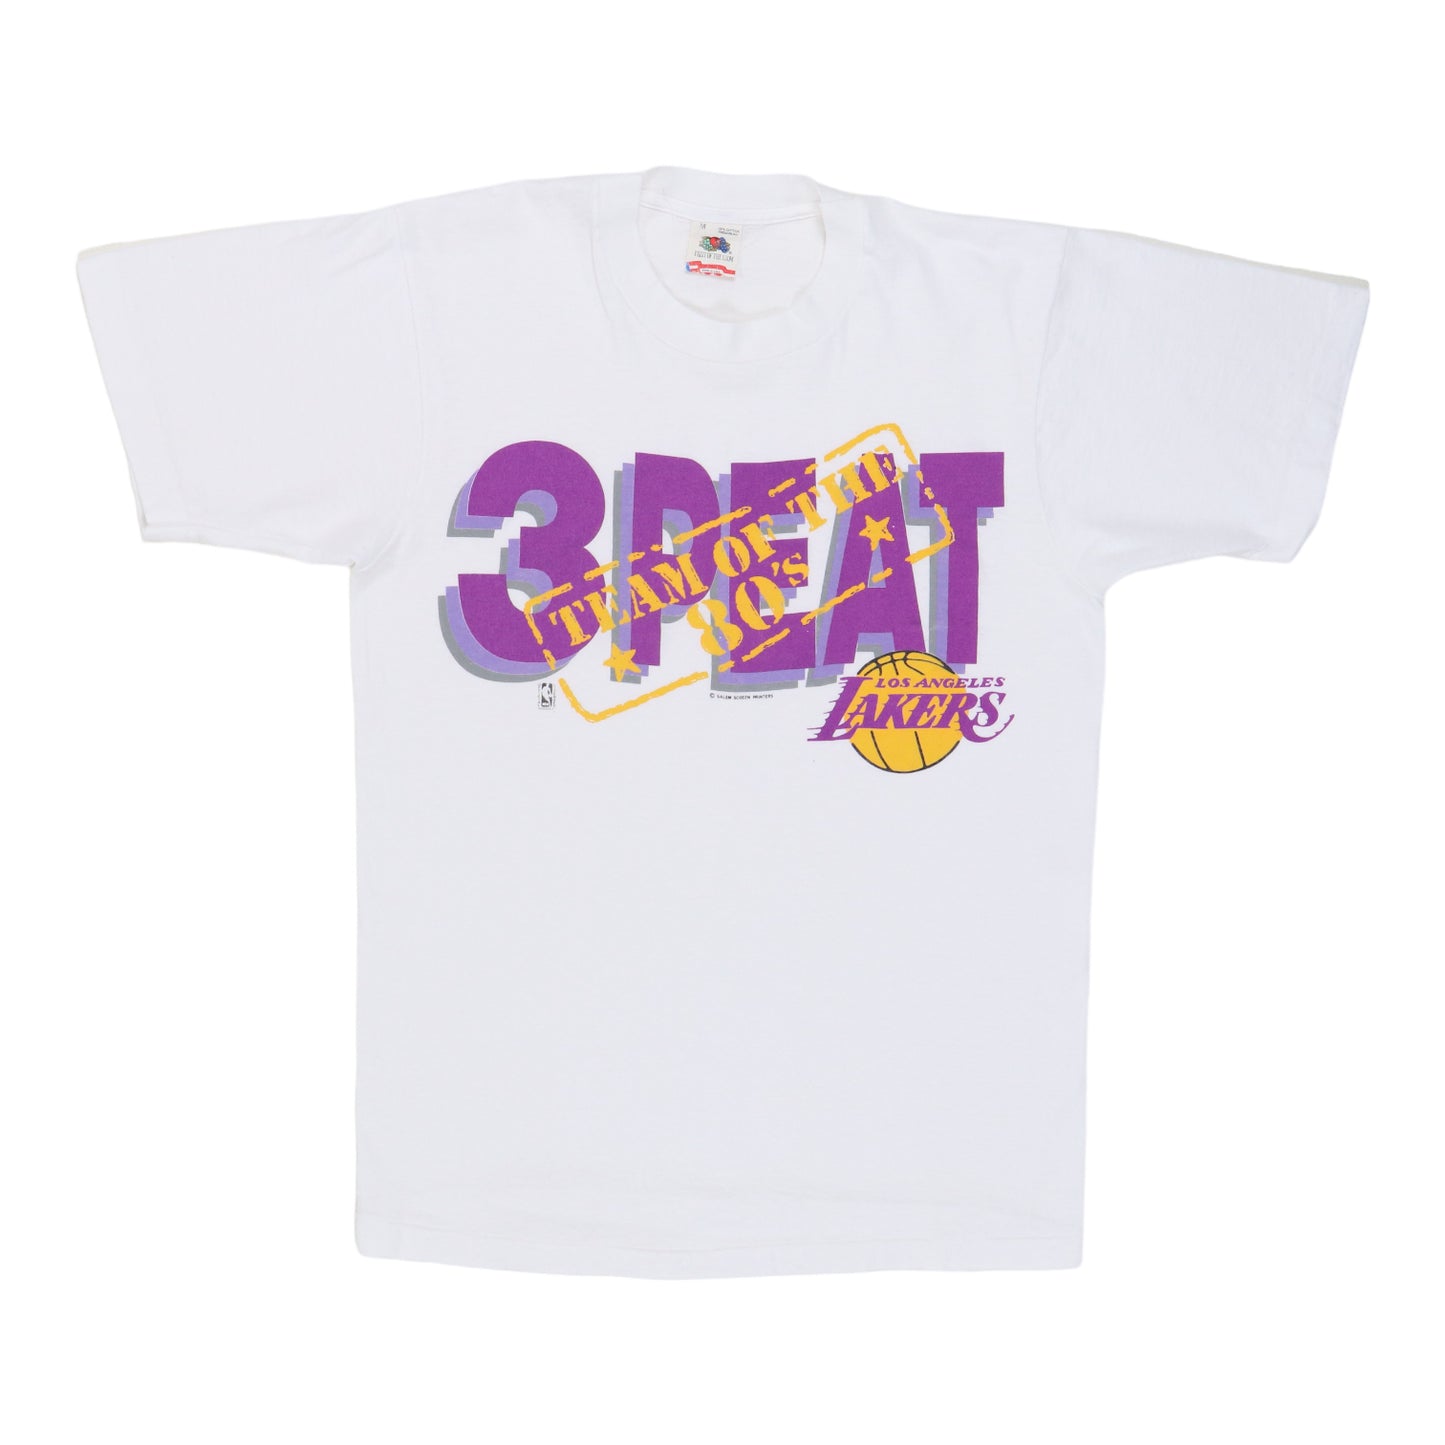 1989 Los Angeles Lakers 3 Peat Team Of The 80s Shirt